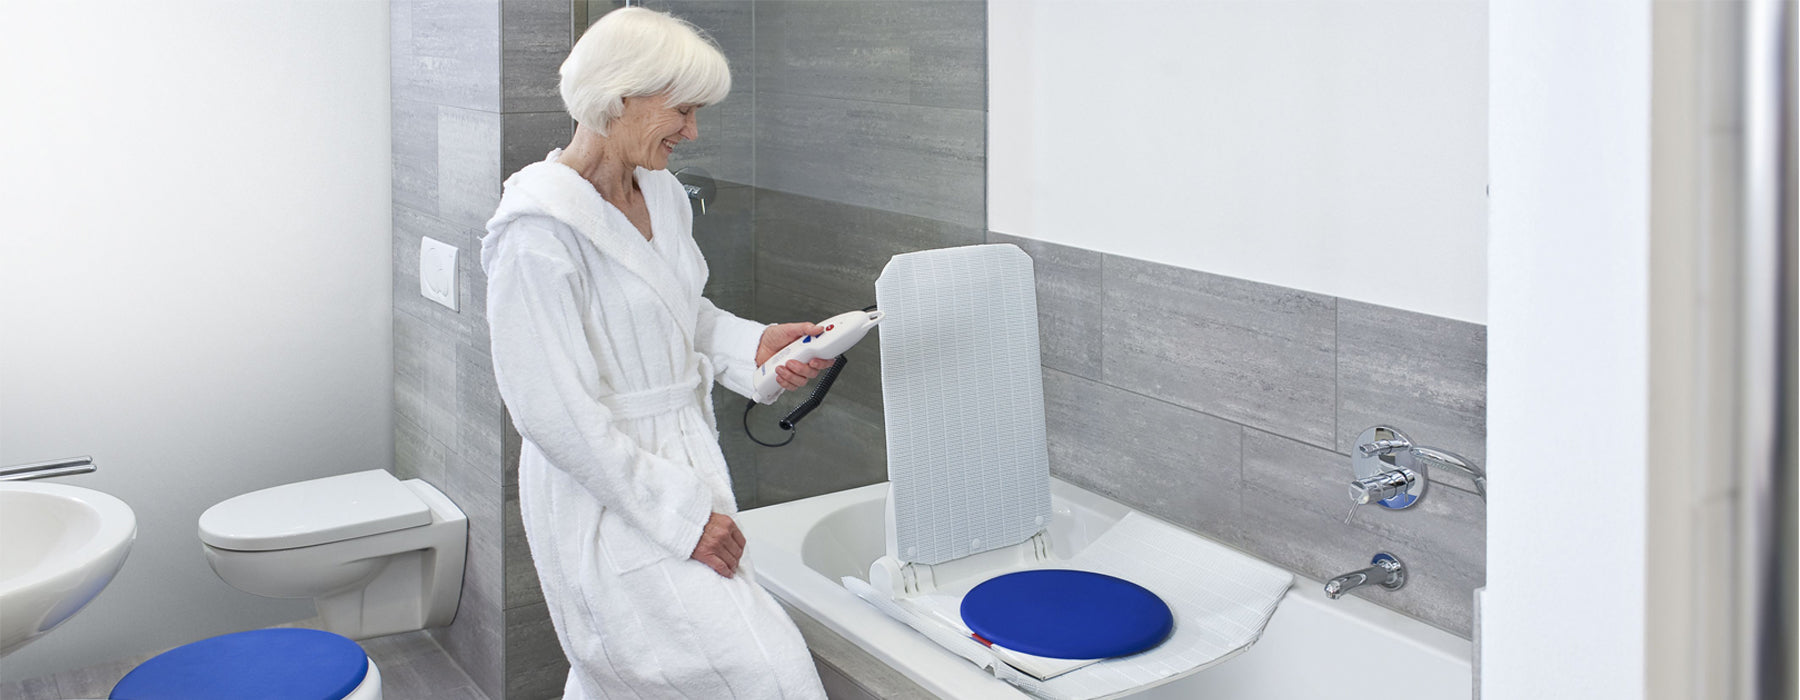 The Aquatec Orca bath lift is an electric bath chair that lowers and lifts the user in and out of the bath, reducing the strain on the user and preventing the risk of falls